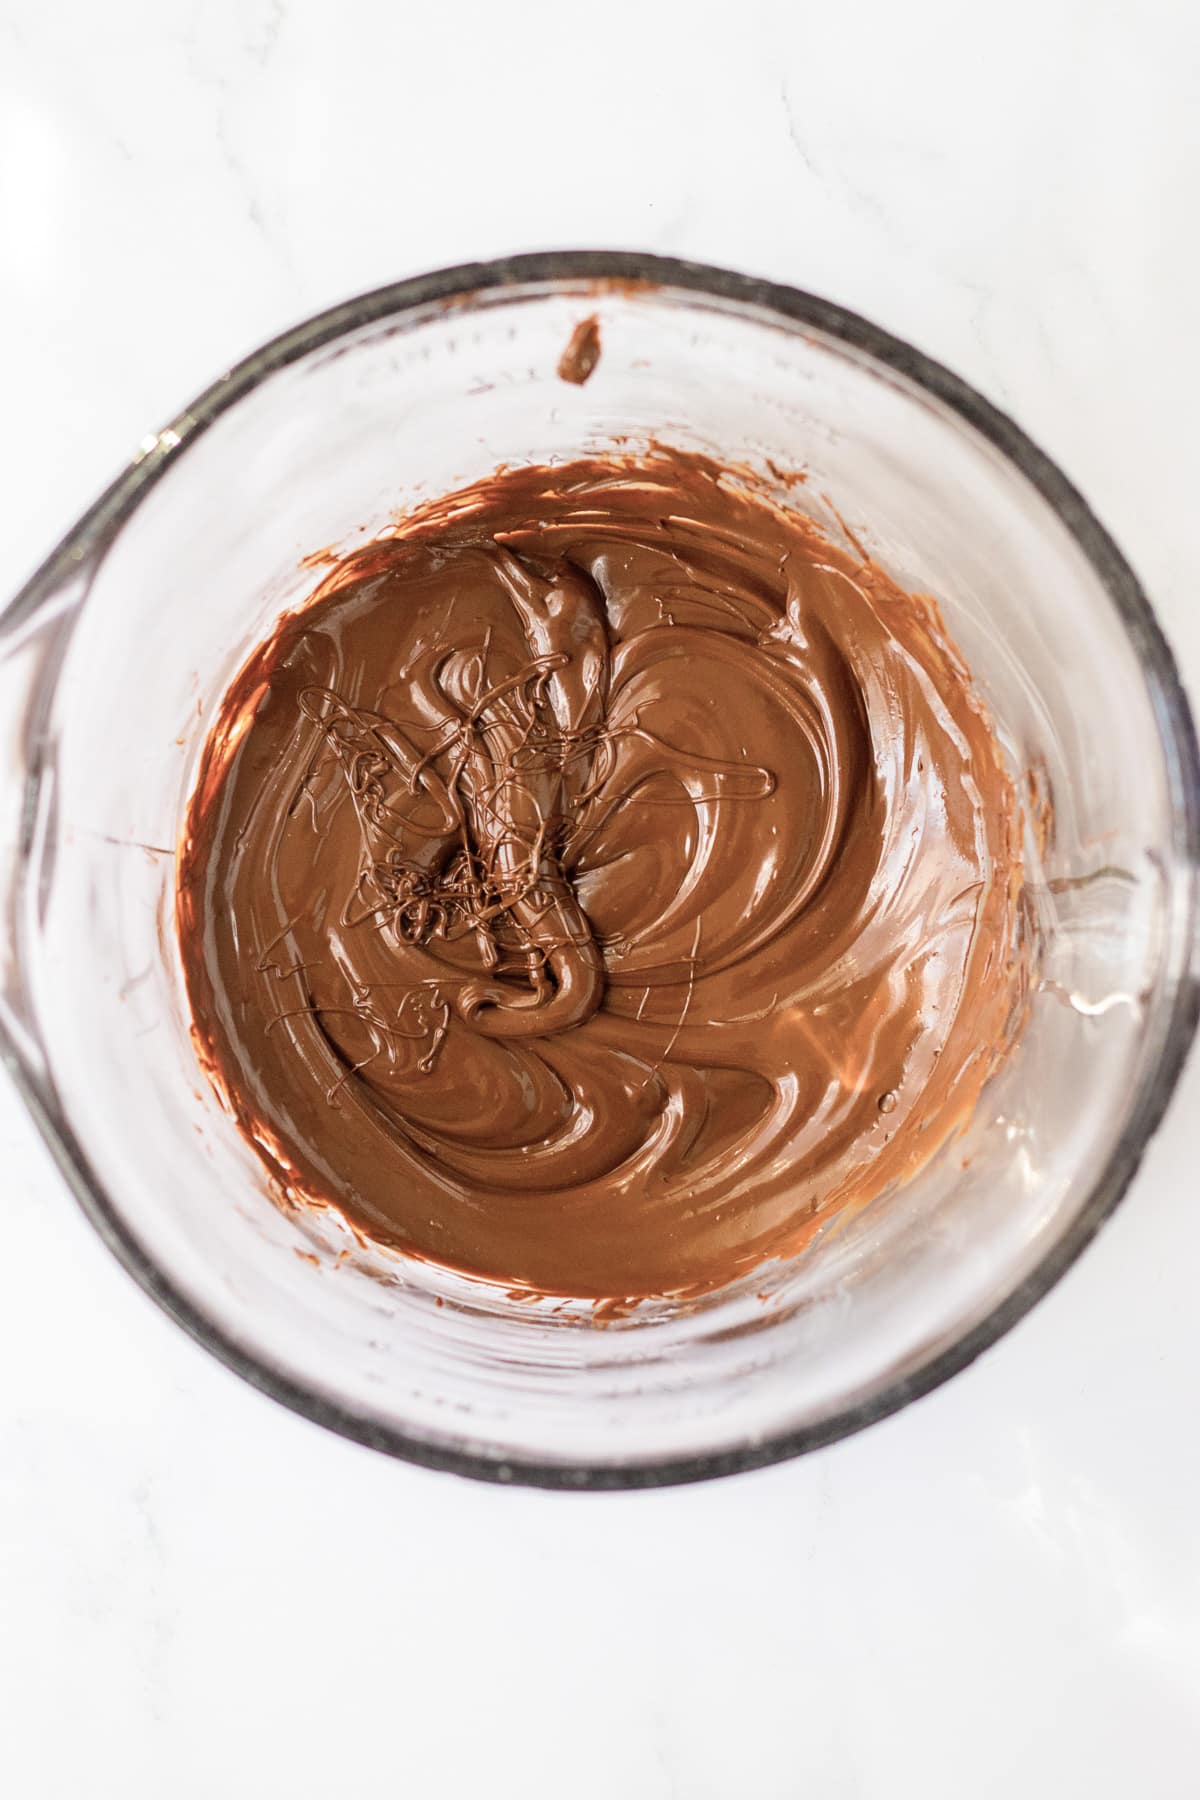 Melted chocolate in a glass measuring cup from above.